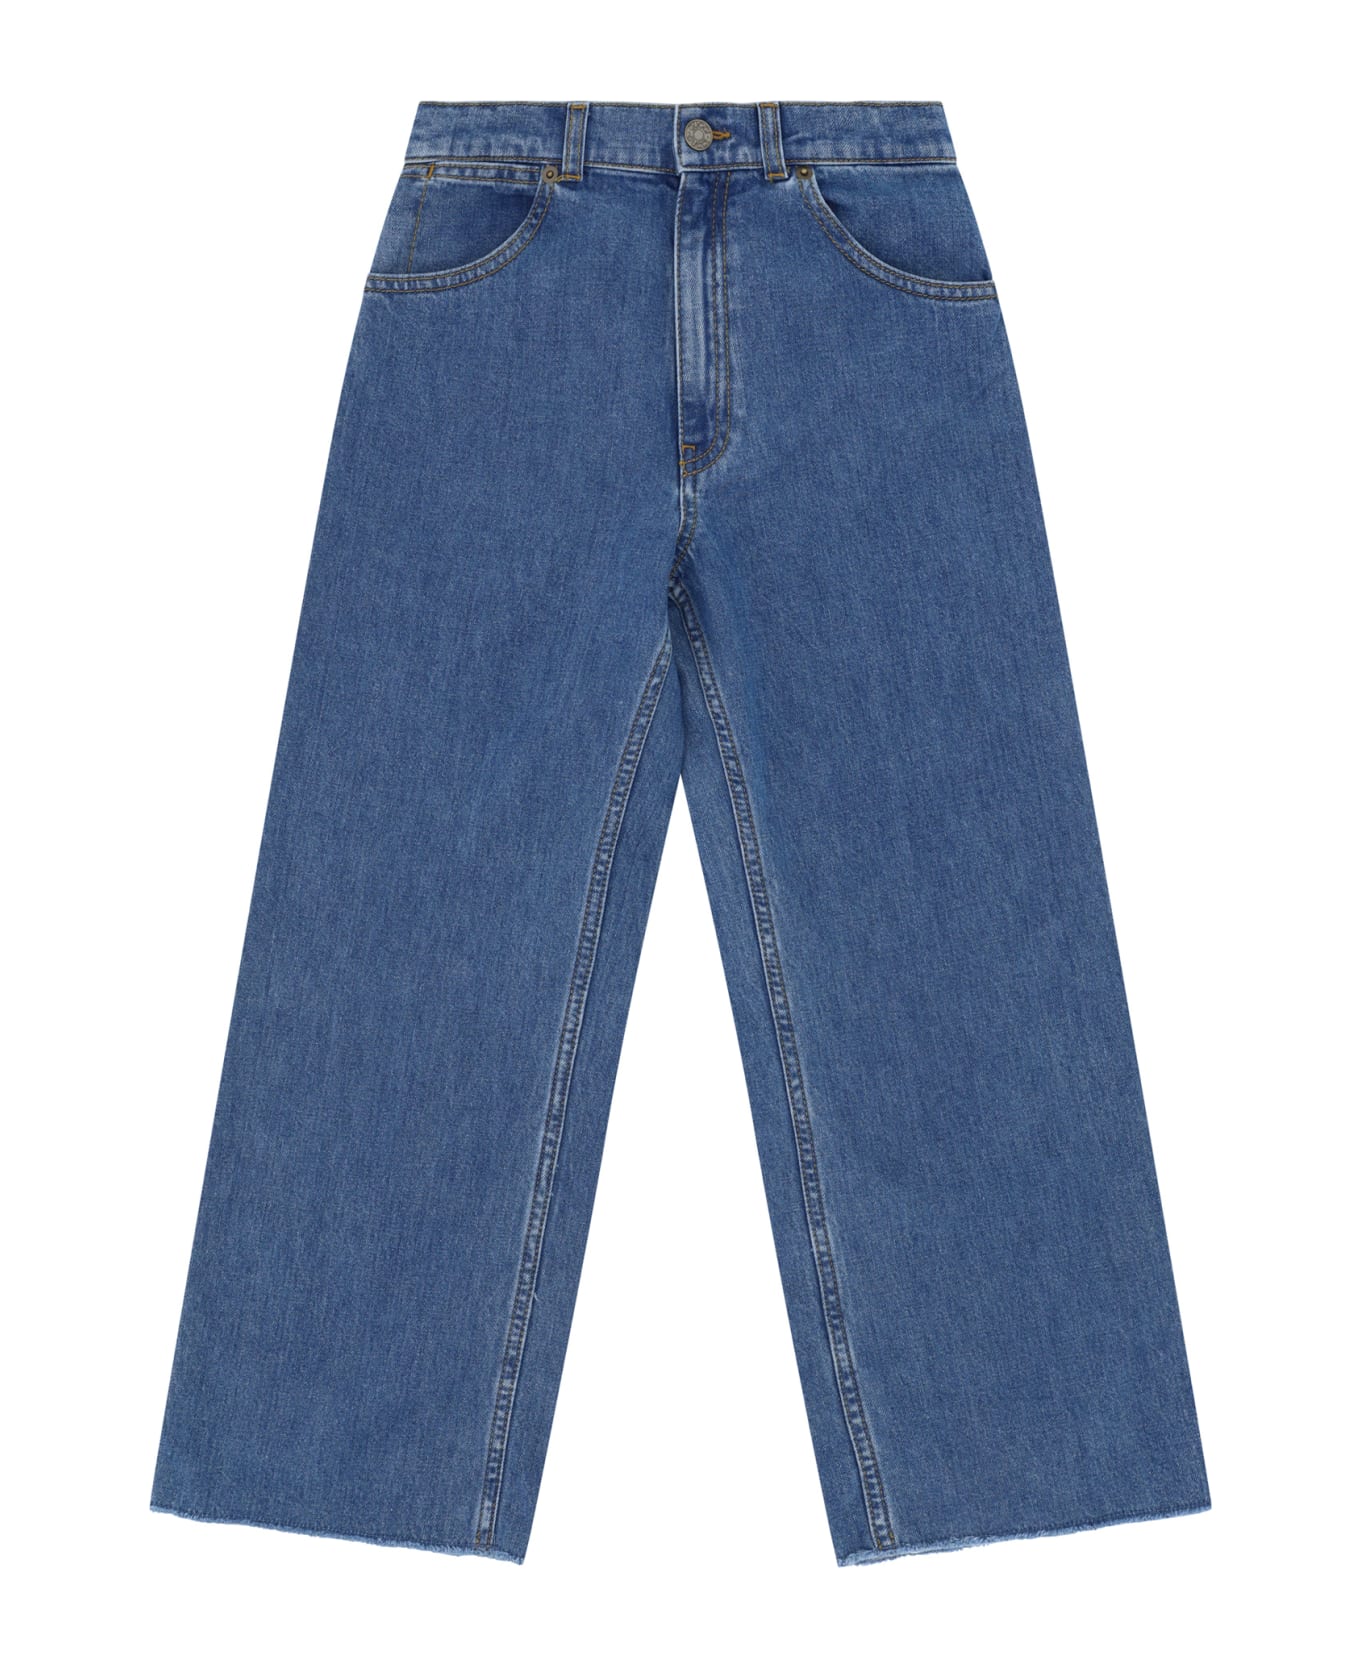 Gucci Jeans For Boy - Blue/mix ボトムス